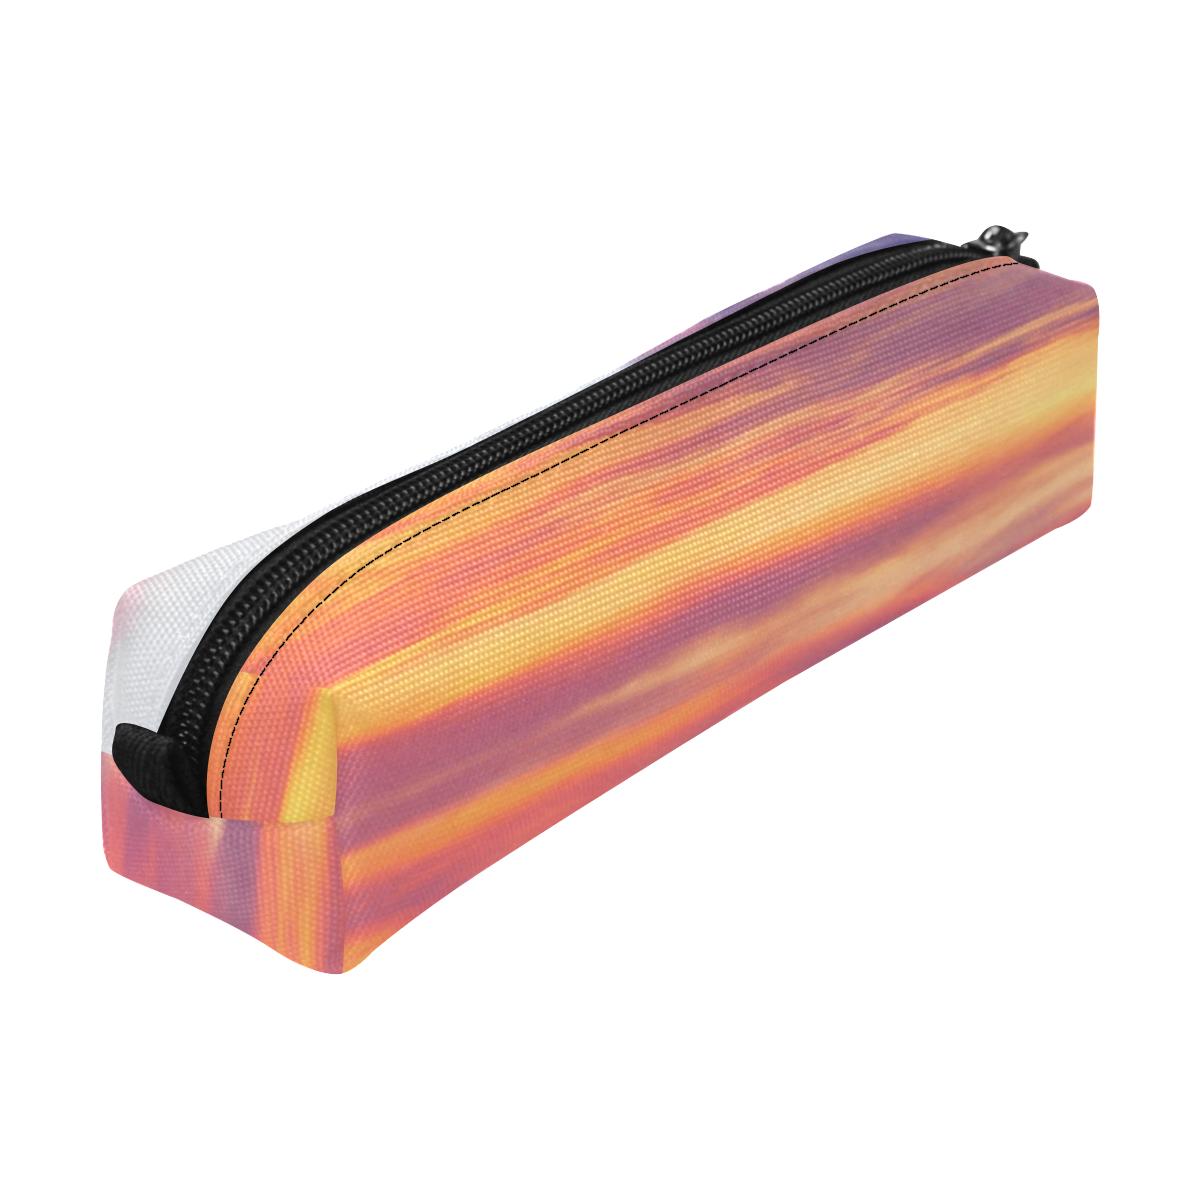 Fire in the sky photo Pencil Pouch/Small (Model 1681)